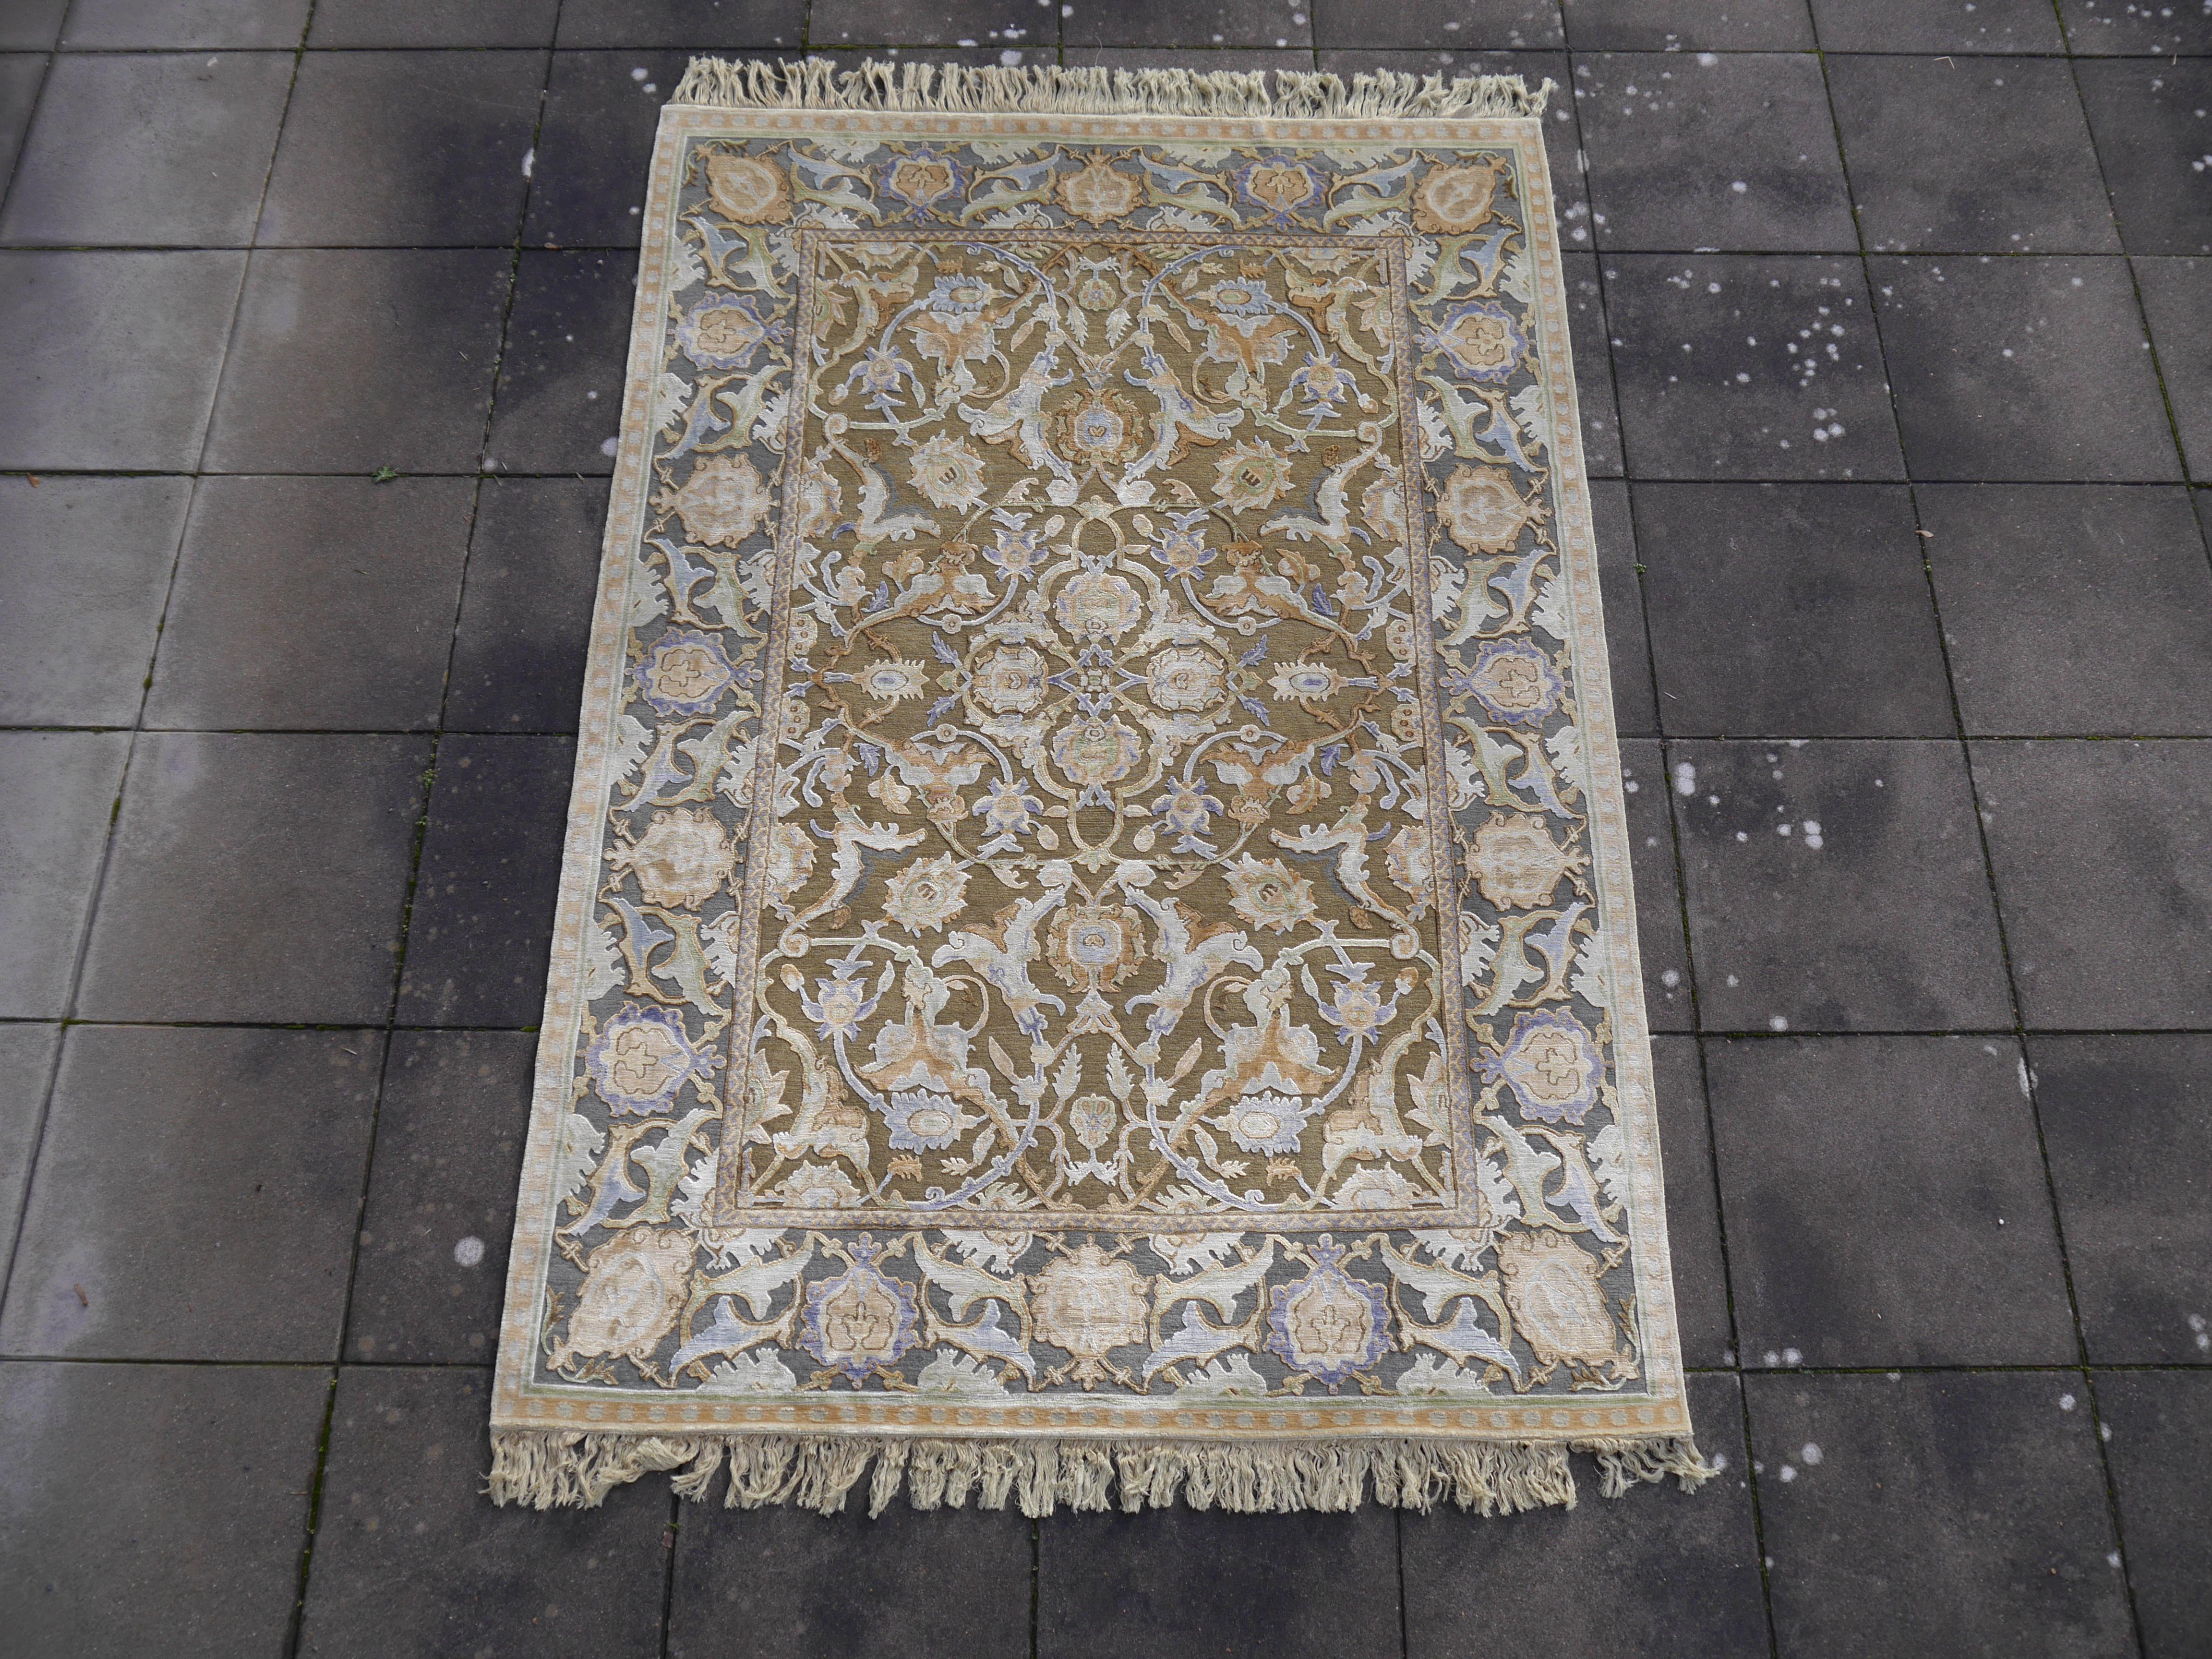 New Polonaise Rug Silk and Wool Antique Isfahan Design Bespoke Sizes 8